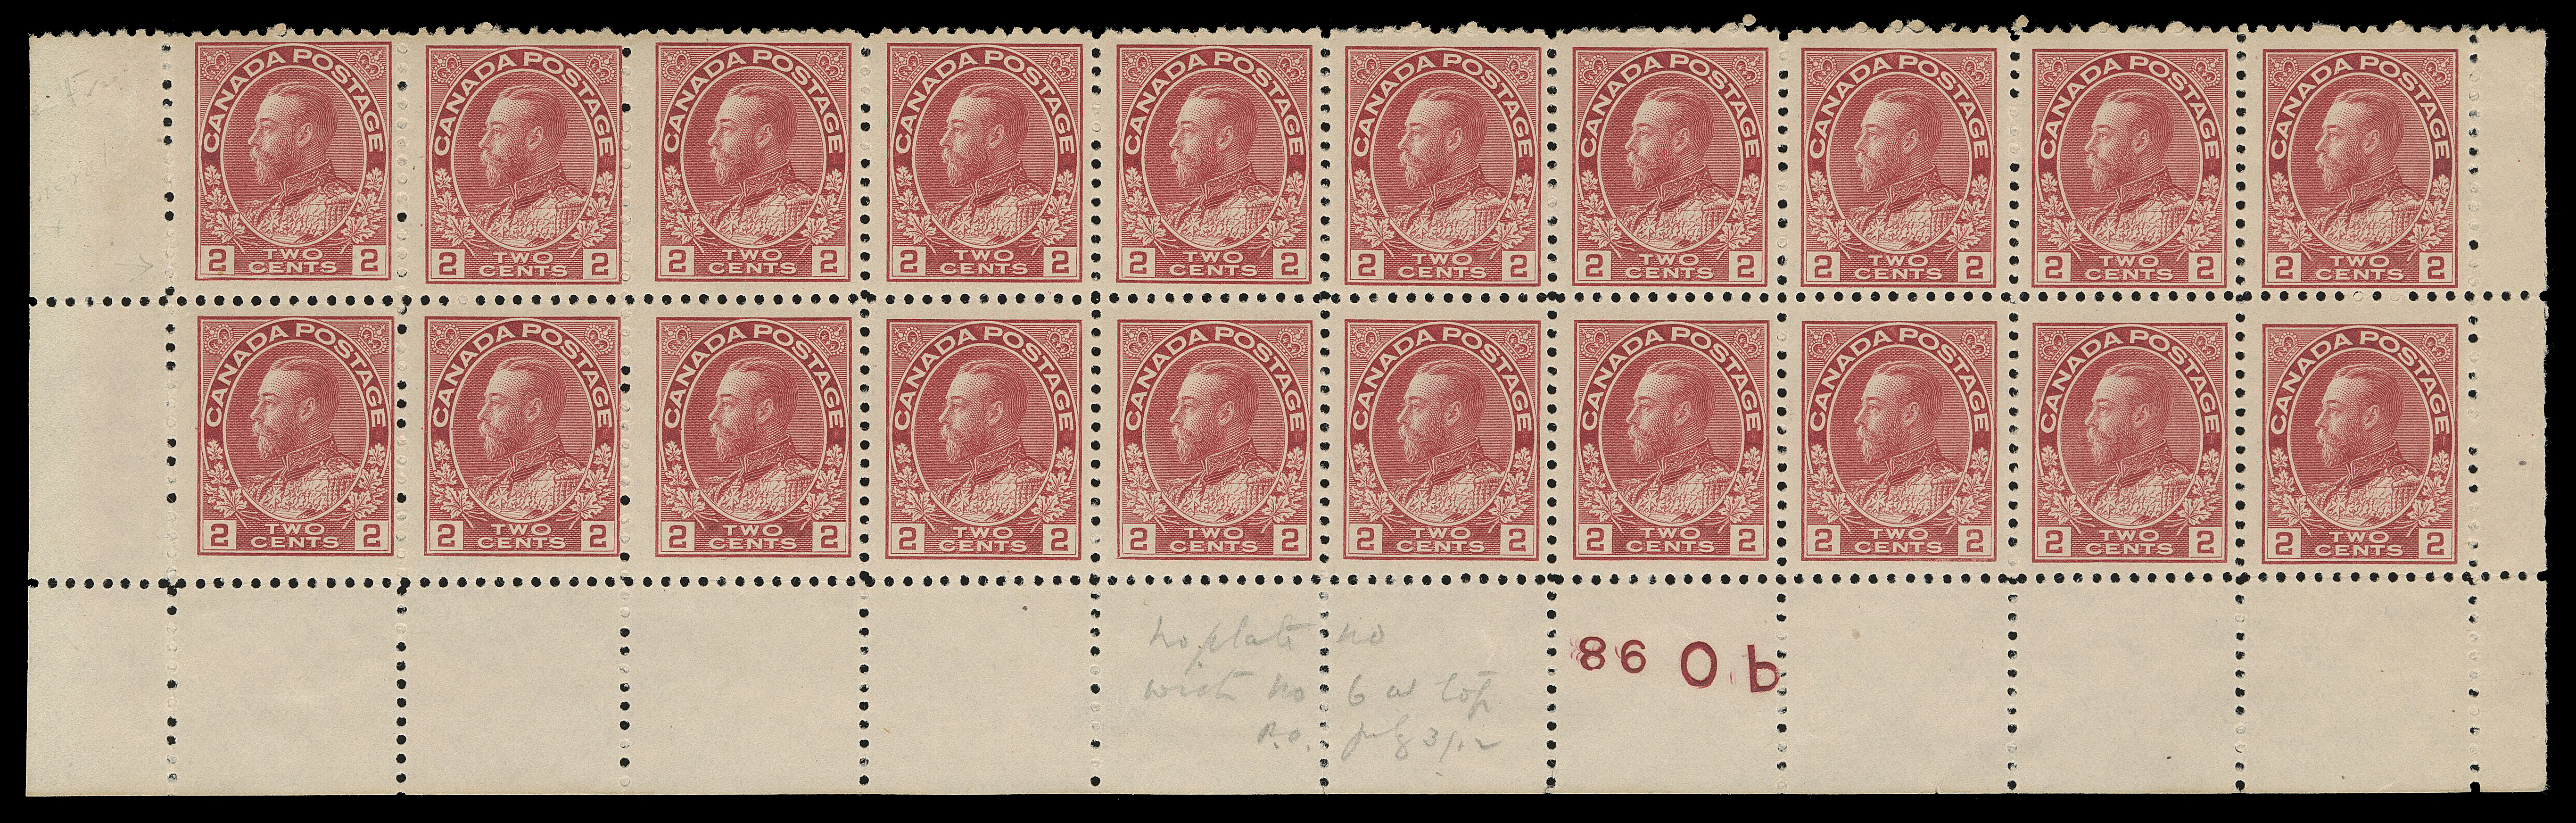 ADMIRAL STAMPS  106c,Lower left strip of twenty, rarely seen without plate number (proving that at least one 2c plate did not have plate imprints in the lower panes); showing instead printing order number "98", reasonably centered in a very distinctive shade resembling the elusive pink colour, top right stamp LH leaving nineteen stamps NH, F-VF; penciled "No plate no. with No. 6 at top P.O. July 3 / 12" date acquisition in selvedge. A fabulous and important "no plate number" strip believed to be UNIQUE in the entire Admiral series. (Unitrade cat. $1,355+)